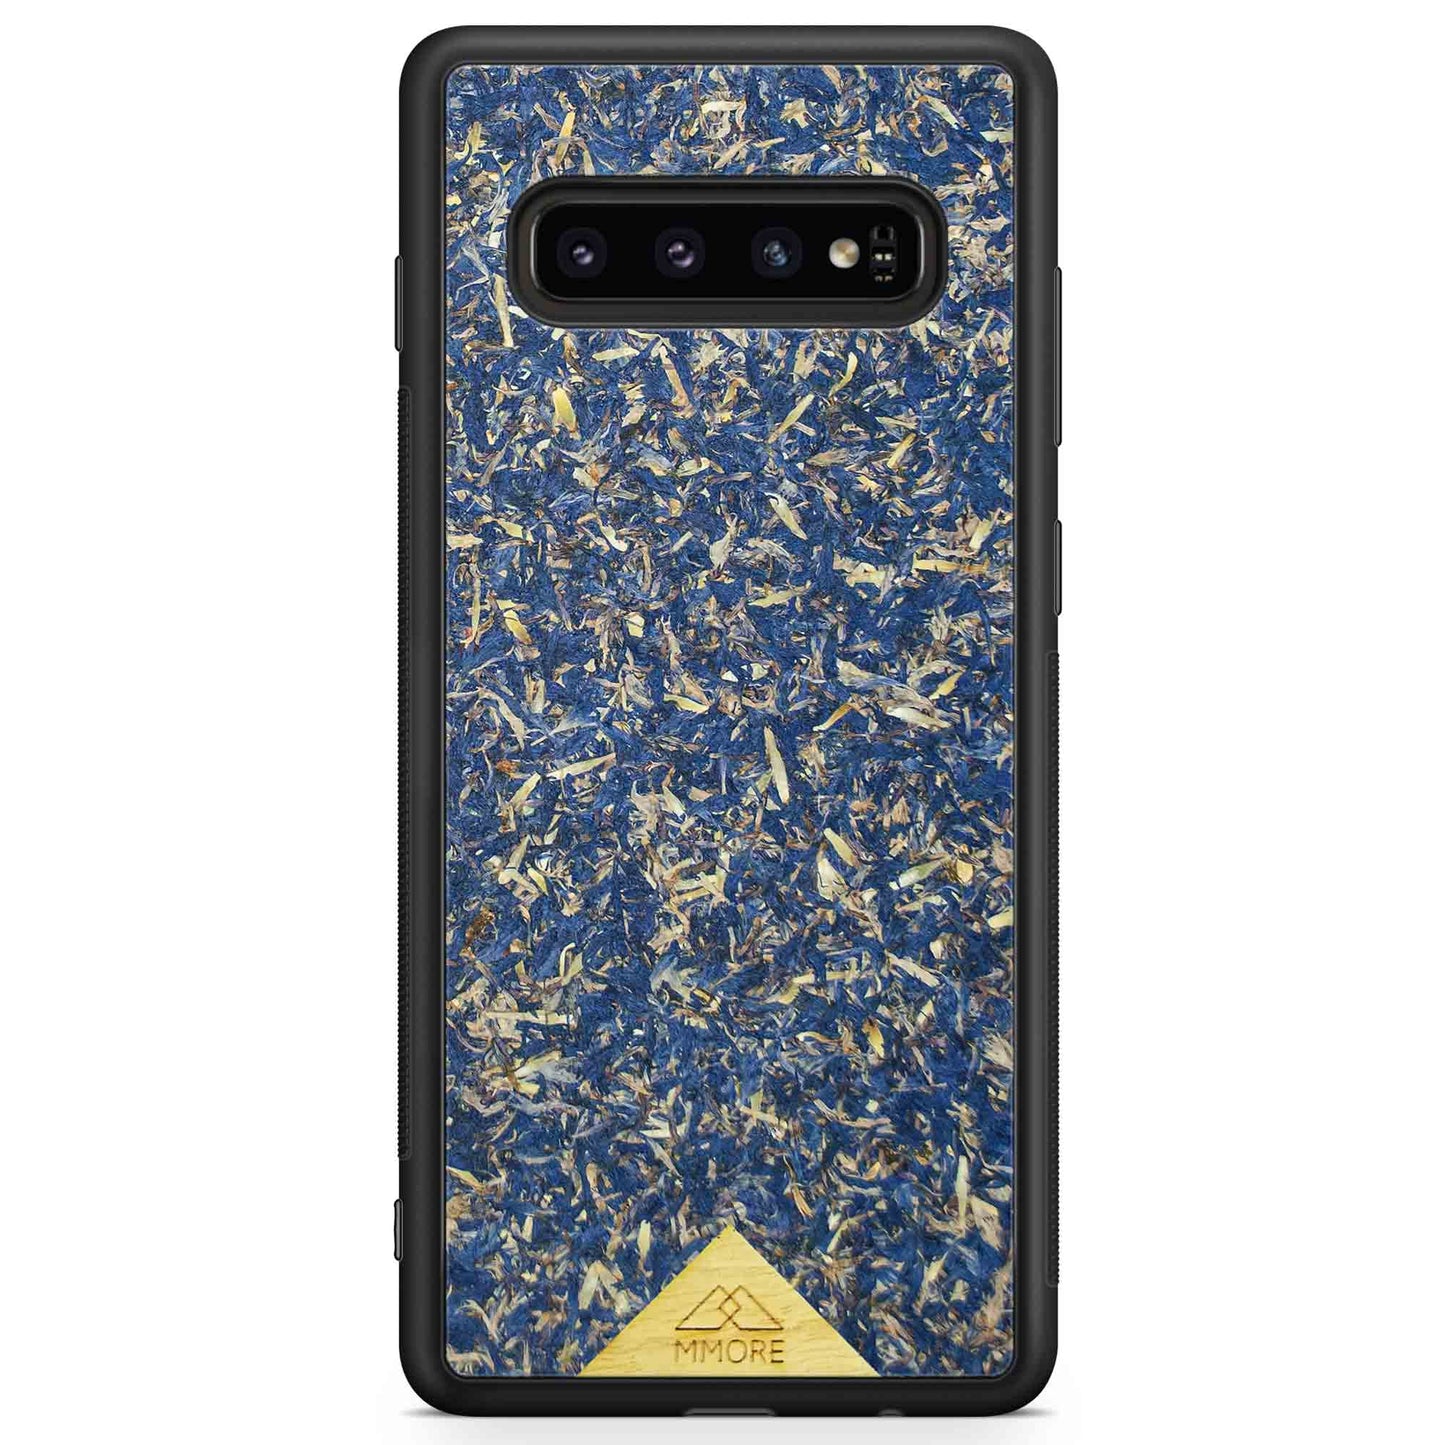 Organic blue cornflower phone case full protection durable and drop tested